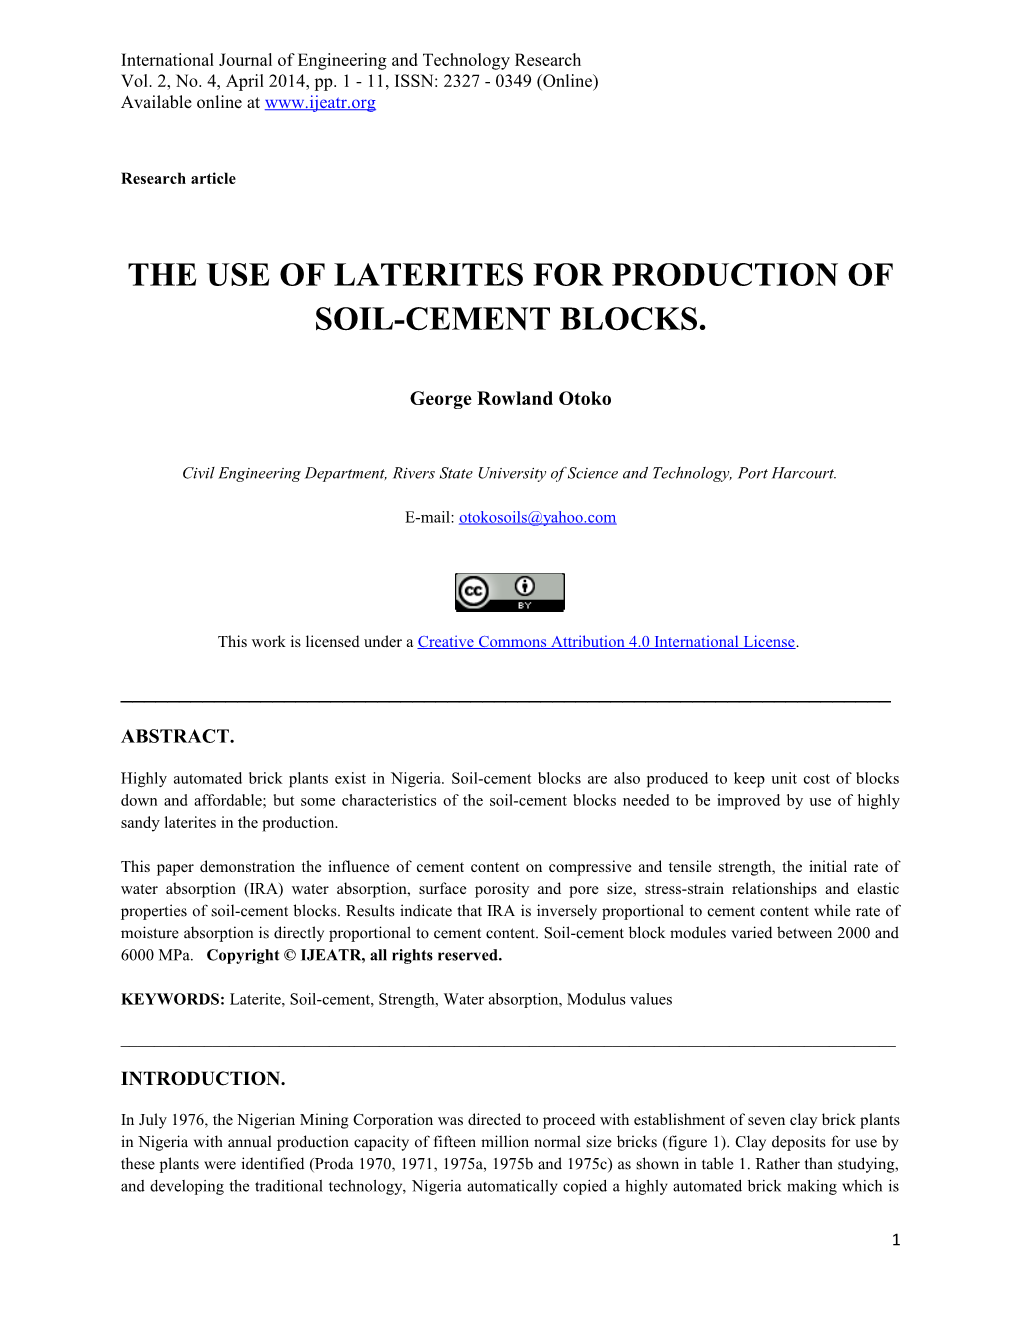 The Use of Laterites for Production of Soil-Cement Blocks